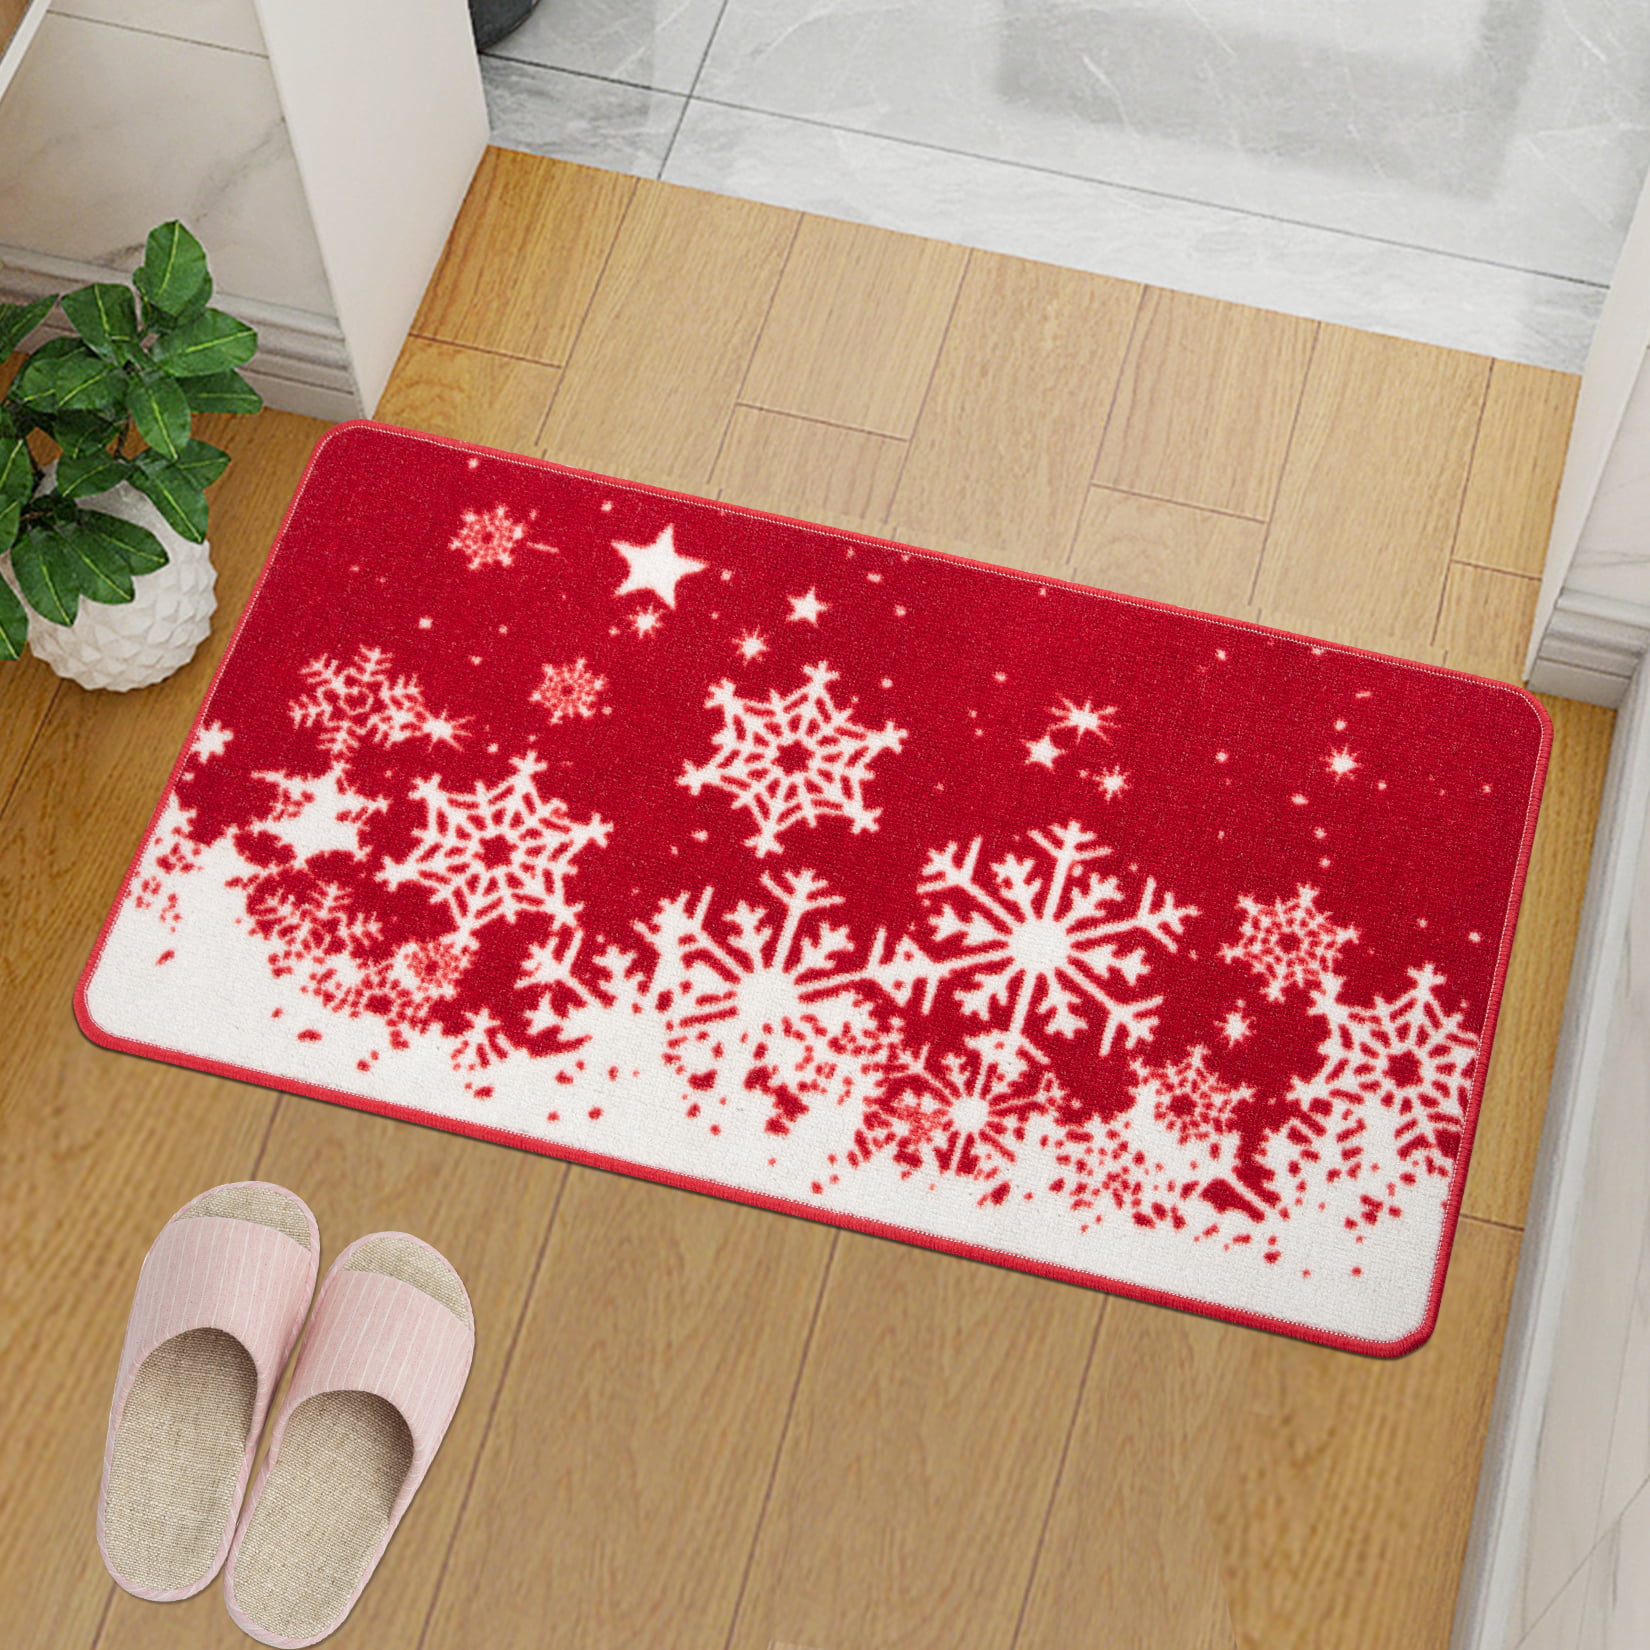 Red Lava Hues Indoor Doormat - Colorful Welcome Mat